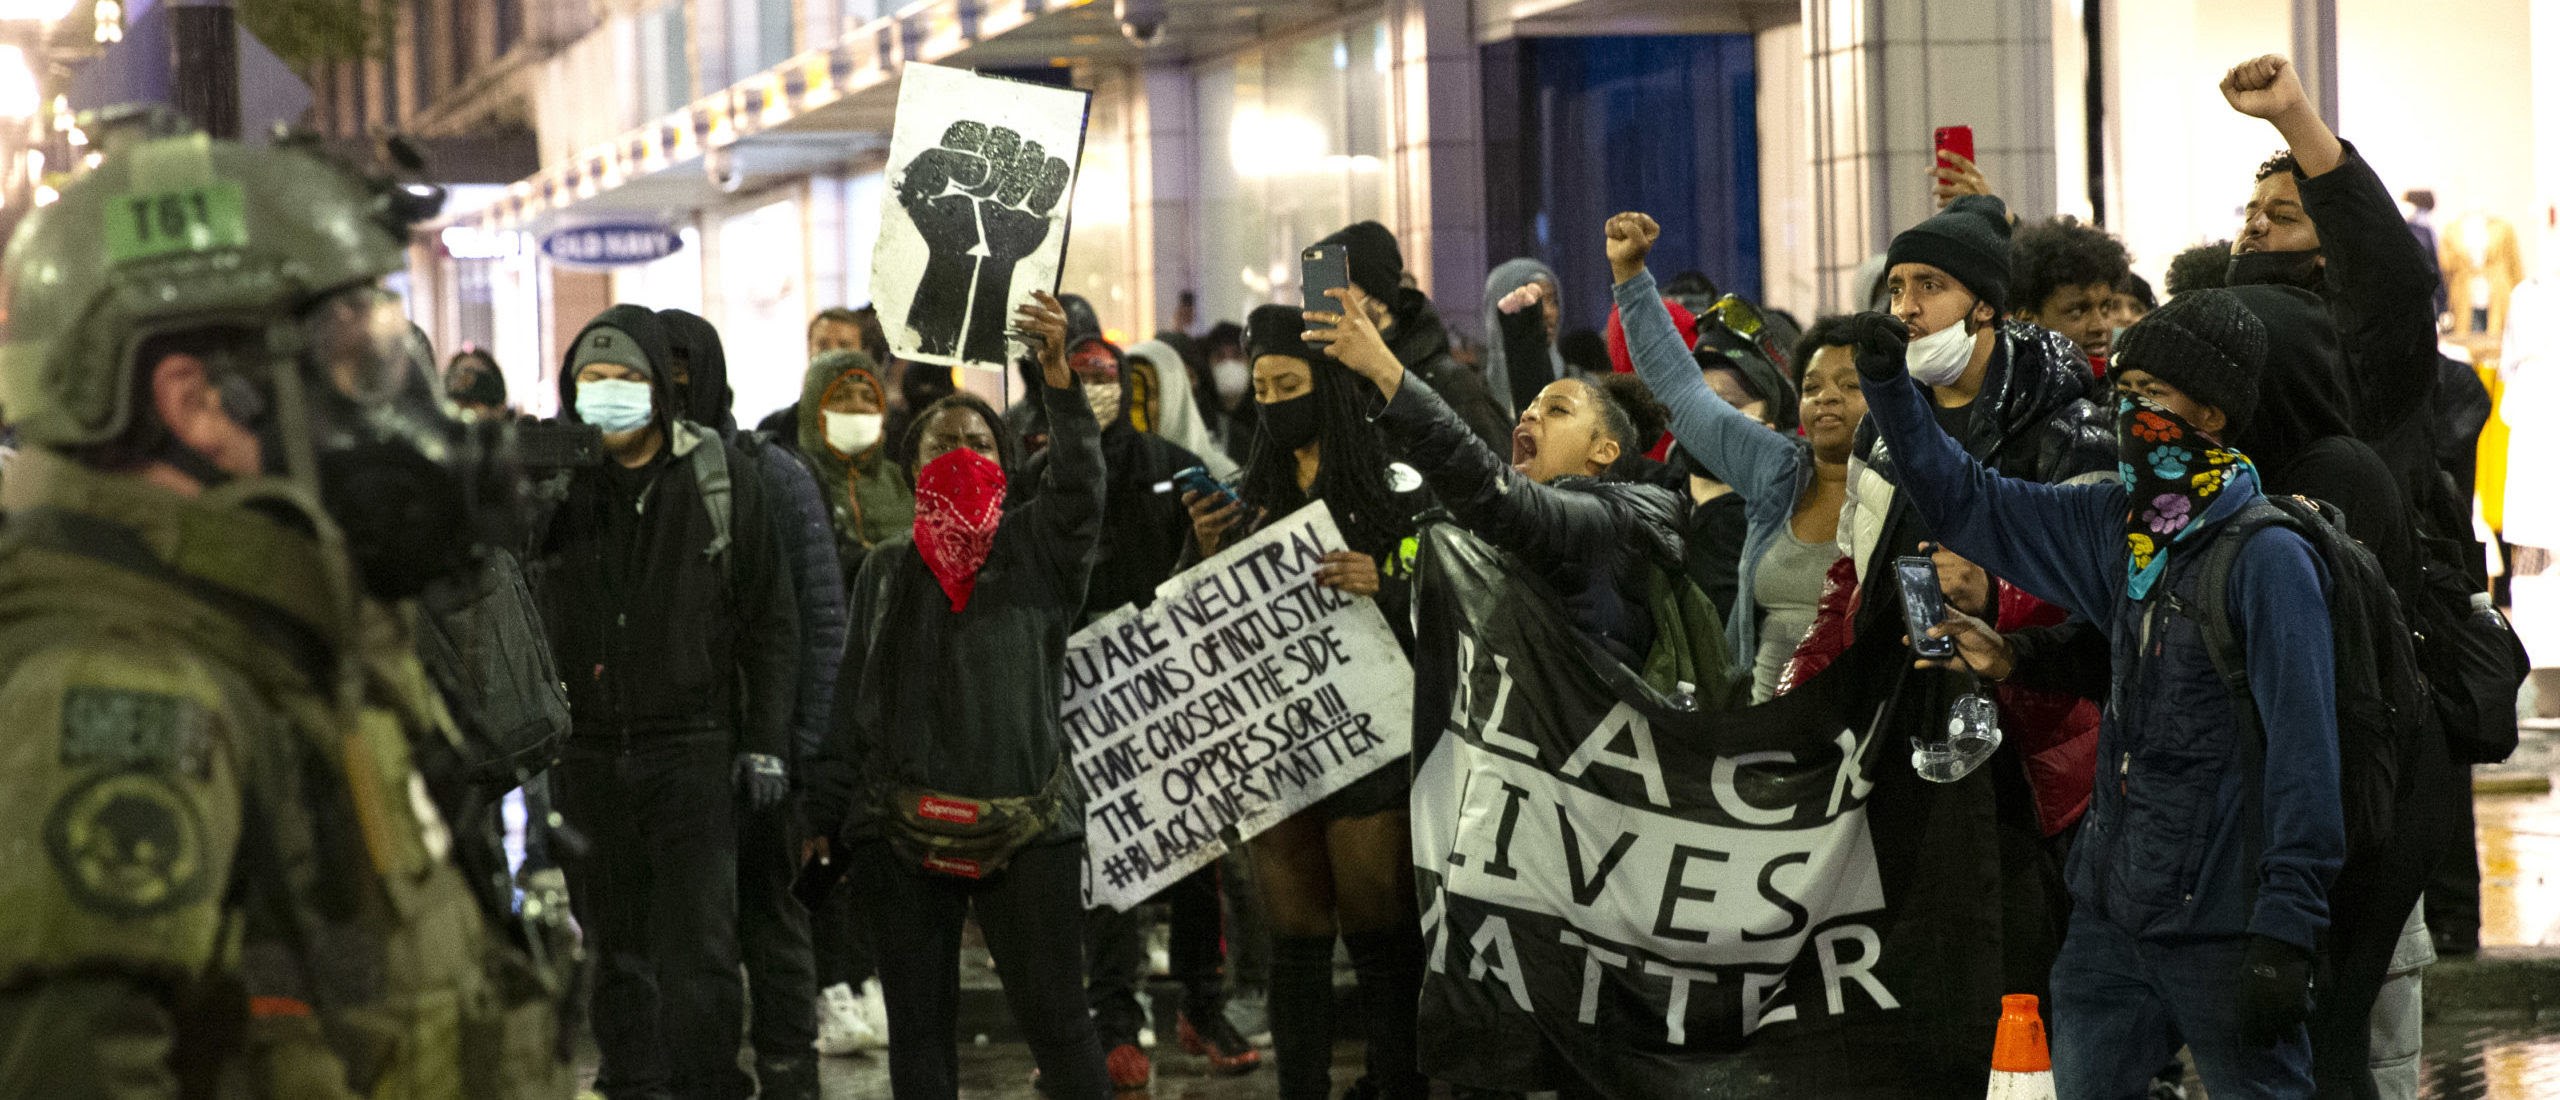 SEATTLE, WA - MAY 30: Protesters holding a Black Lives Matter banner shout at law enforcement officers on May 30, 2020 in Seattle, Washington. A peaceful rally was held earlier in the day expressing outrage over the death of George Floyd who died while in the custody of police in Minneapolis. Police deployed flash bangs and tear gas to break up the crowd who were breaking windows and looting stores. (Photo by Karen Ducey/Getty Images)